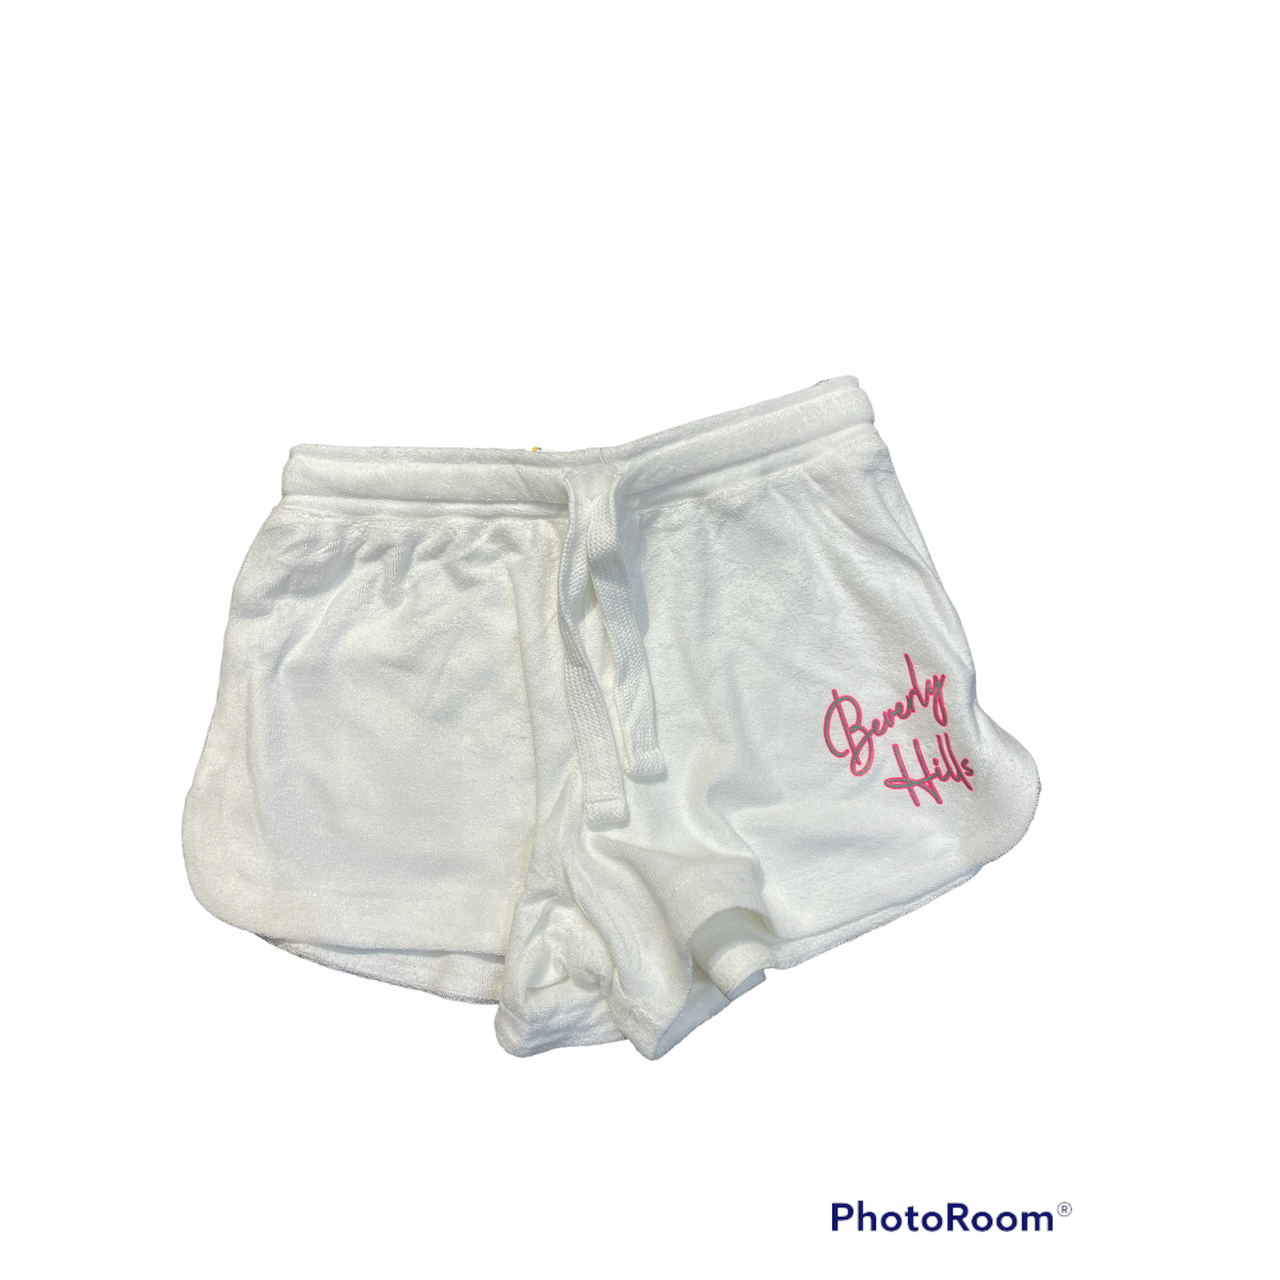 white terry beverly hills short